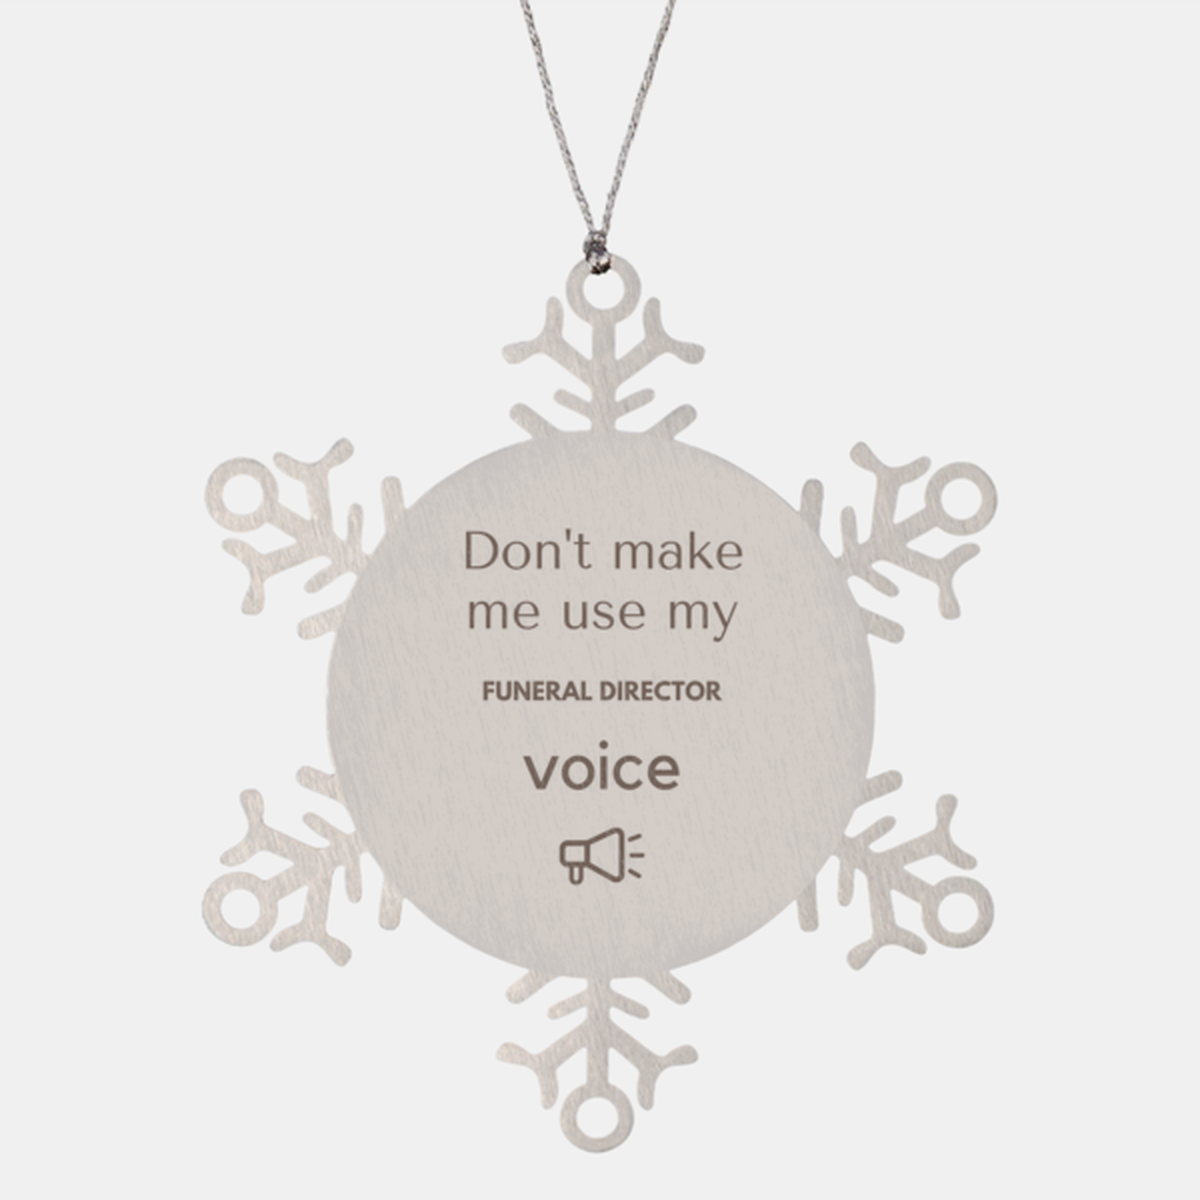 Don't make me use my Funeral Director voice, Sarcasm Funeral Director Ornament Gifts, Christmas Funeral Director Snowflake Ornament Unique Gifts For Funeral Director Coworkers, Men, Women, Colleague, Friends